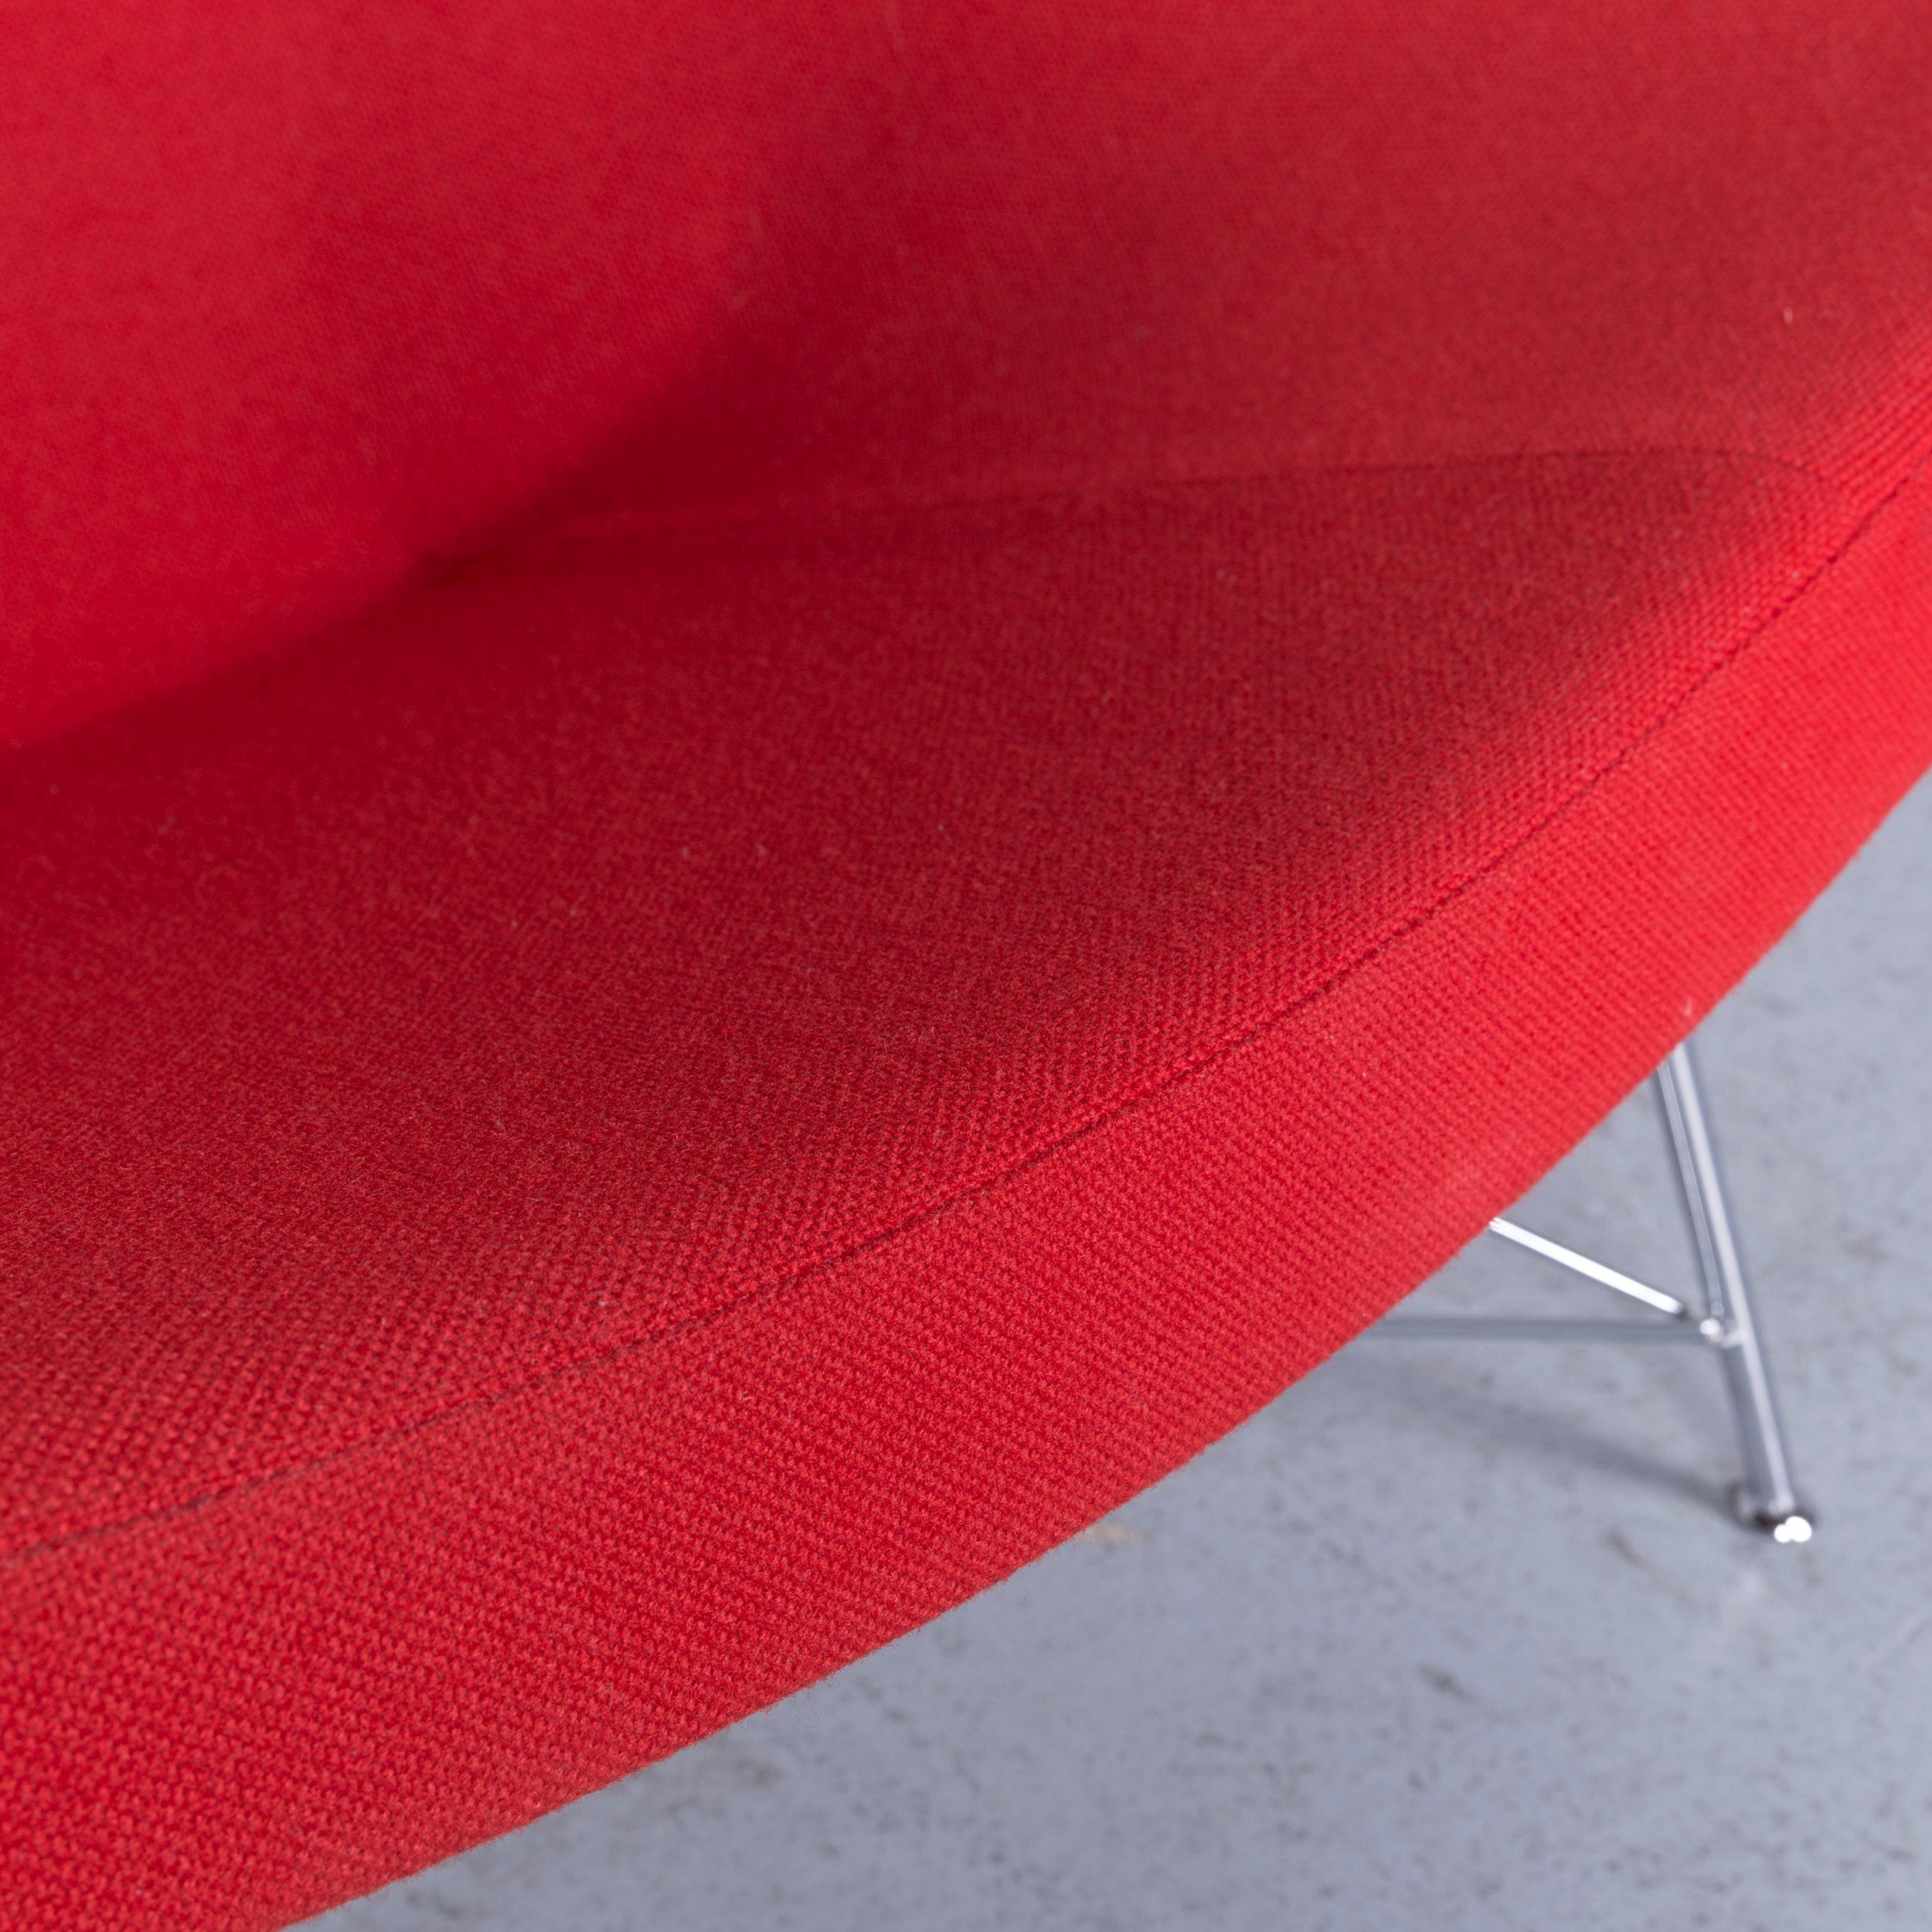 Swiss Vitra Coconut Chair Designer Fabric Chair Red Chrome